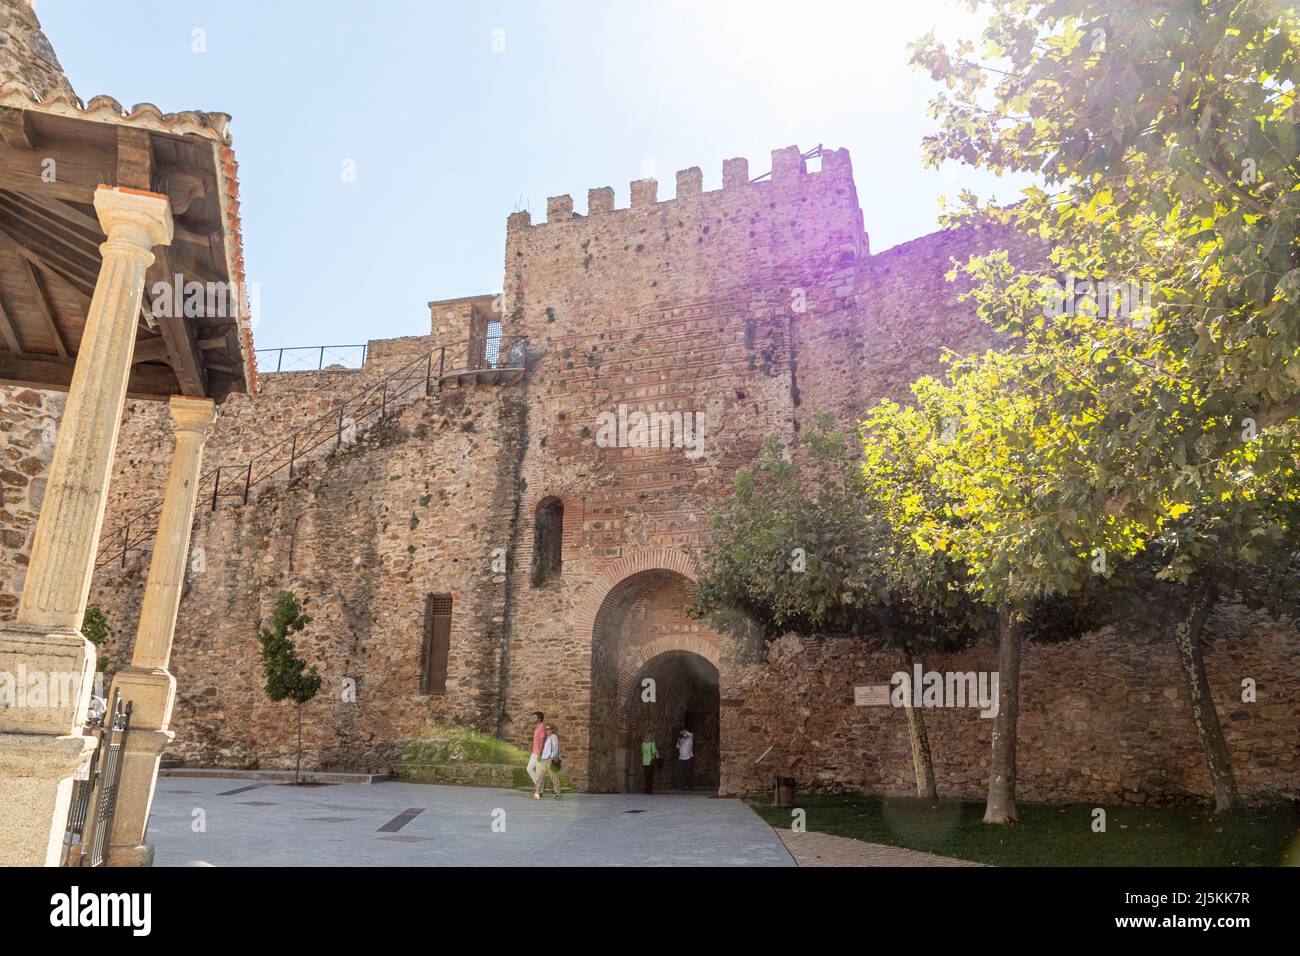 Buitrago del Lozoya, Spain. The Torre Albarrana, a city gate and defensive tower of the walled Old Town Stock Photo